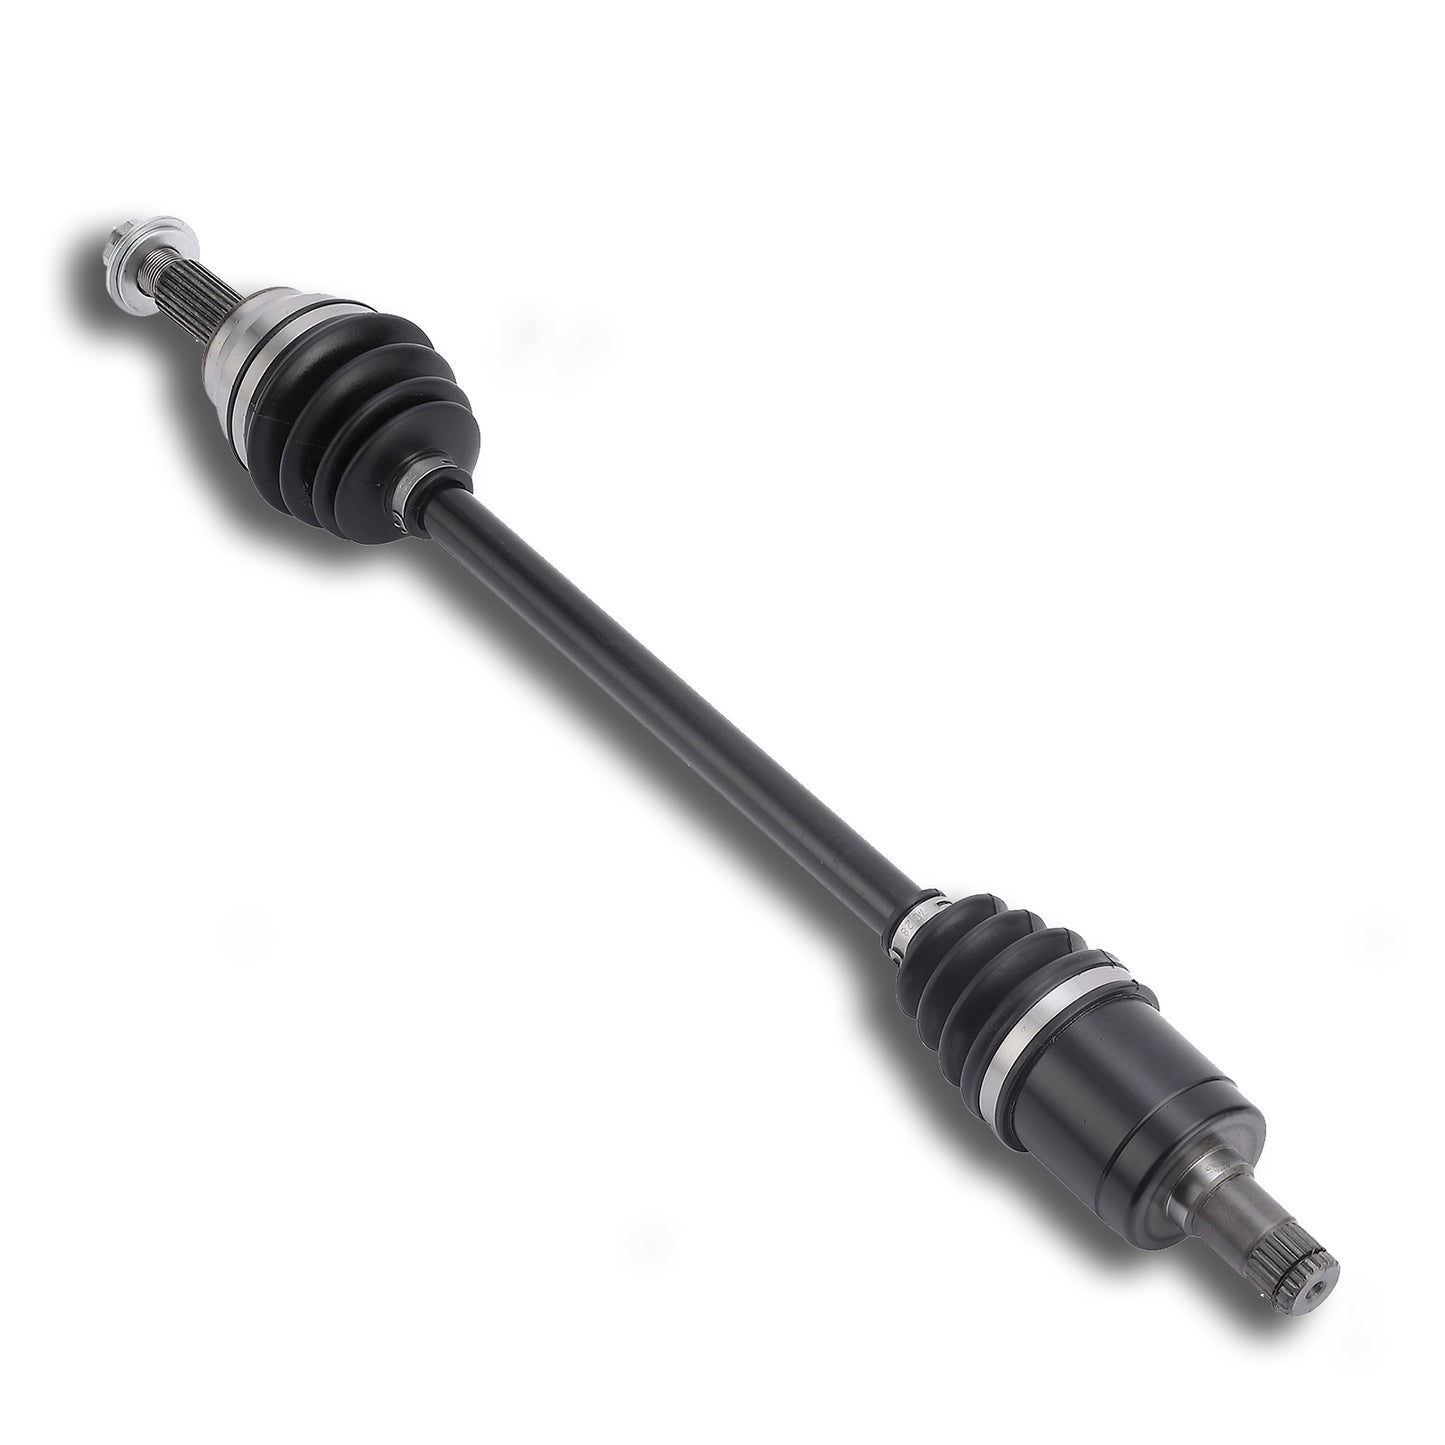 CAM-JD102 Front Left Drive Shaft CV Axle Compatible with JOHN DEERE Gator (2013) XUV 550, 550 S4, 850i BF AM145189 AM145326